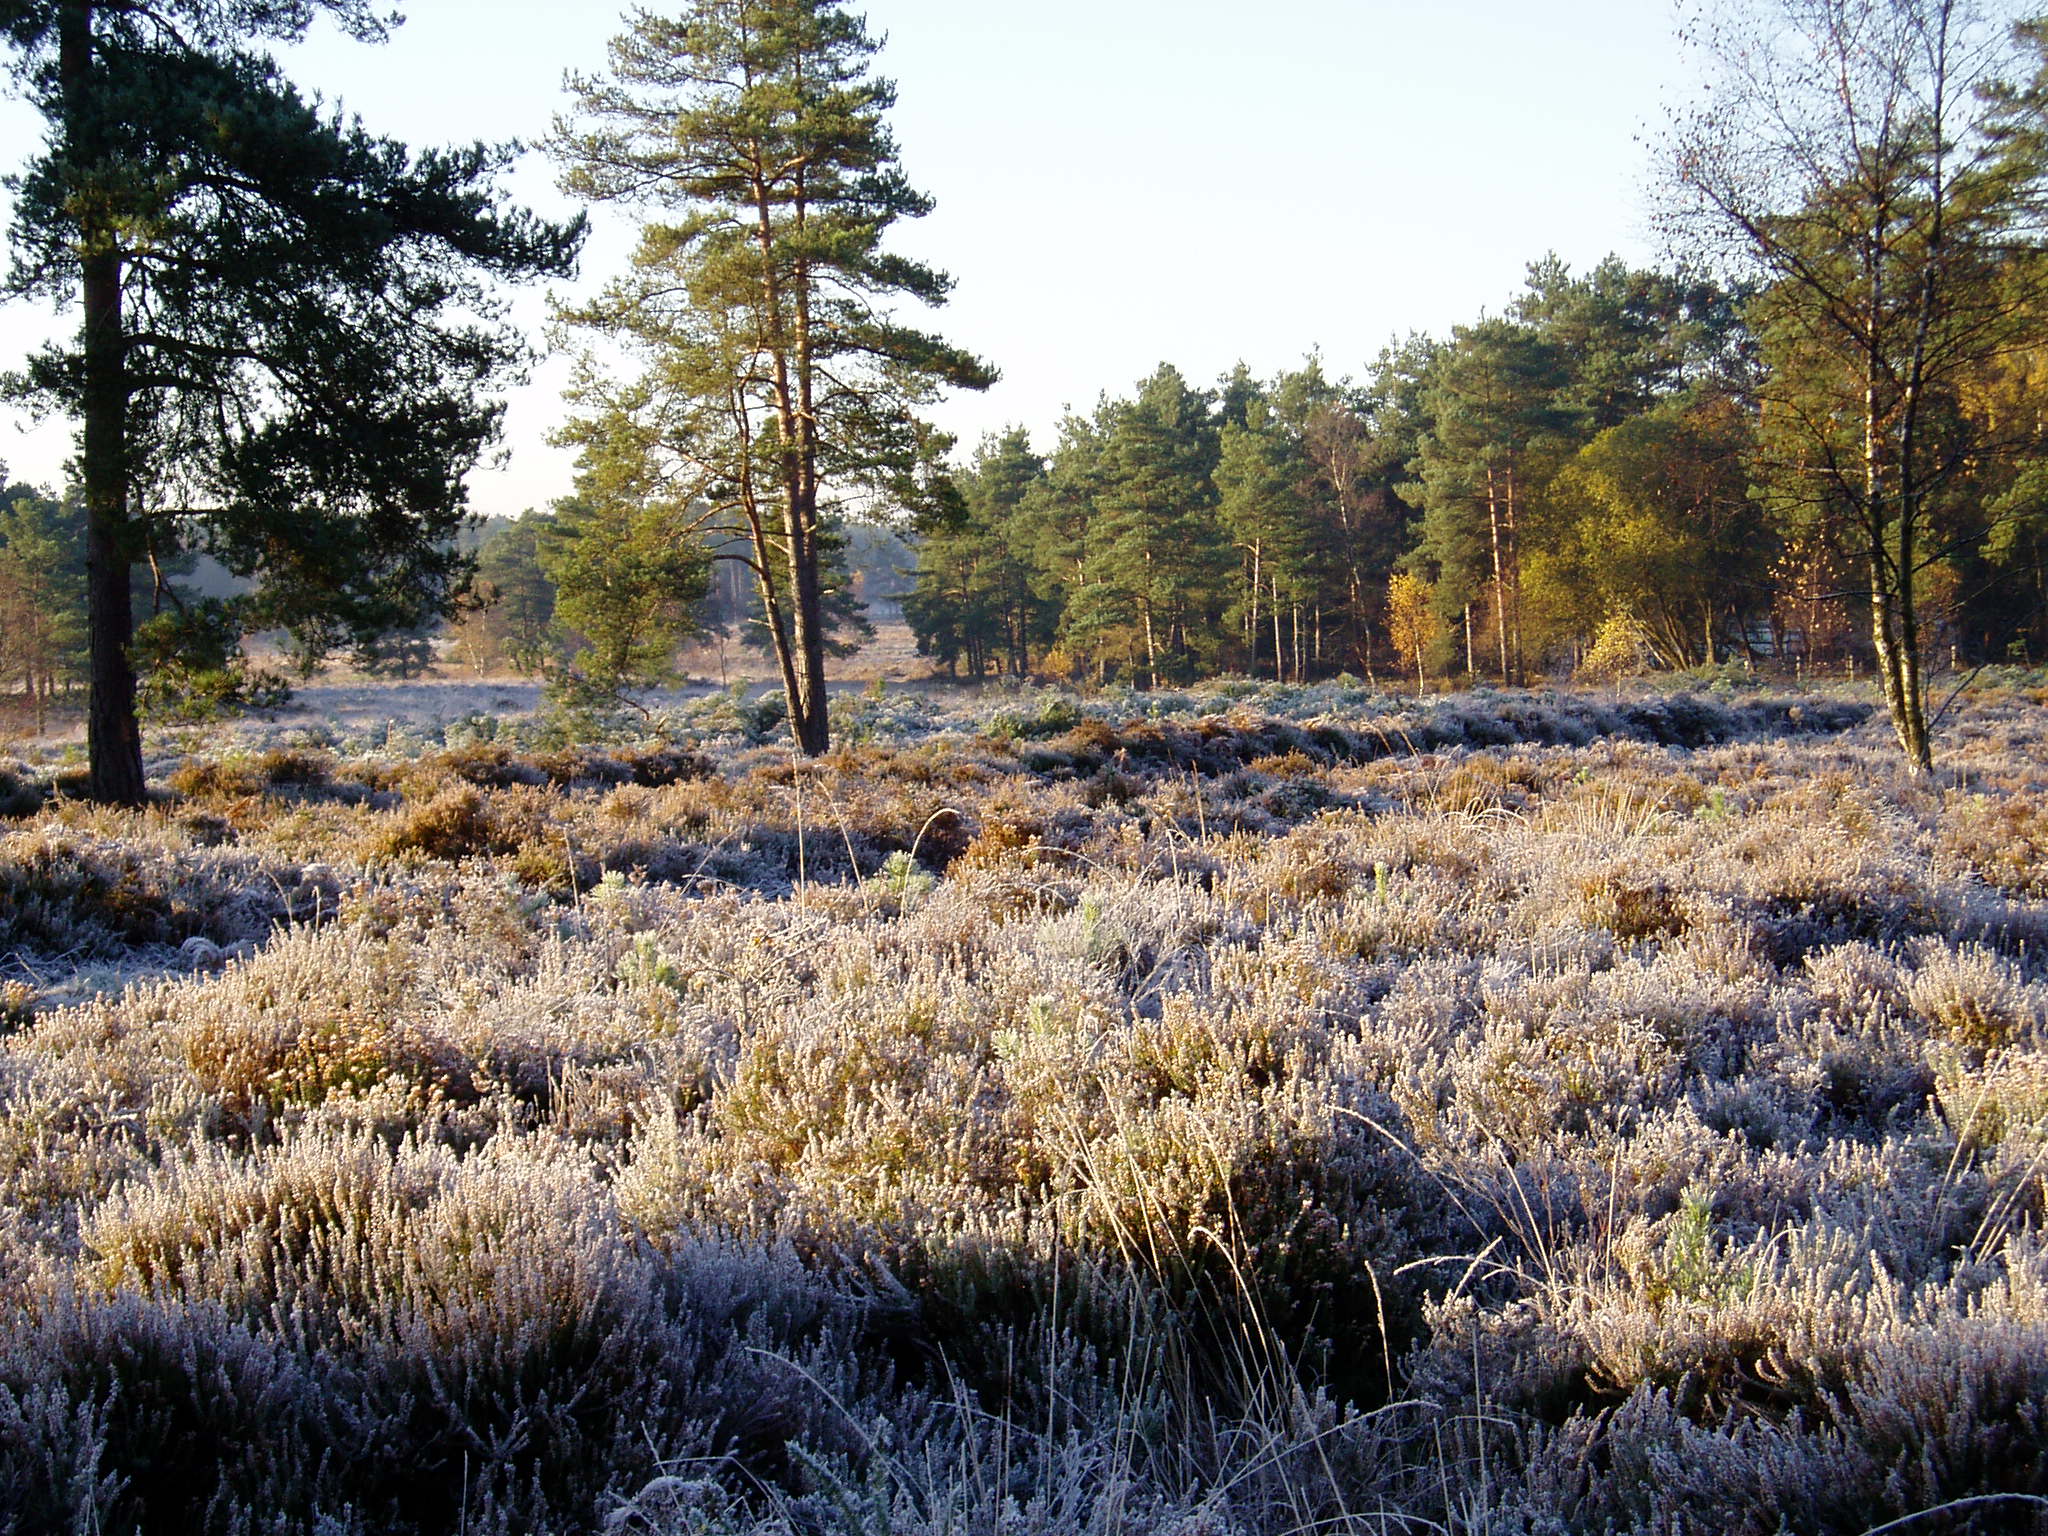 A frosty morning on the heath, the heather is covered by a layer of ice, with tall conifers in the background.